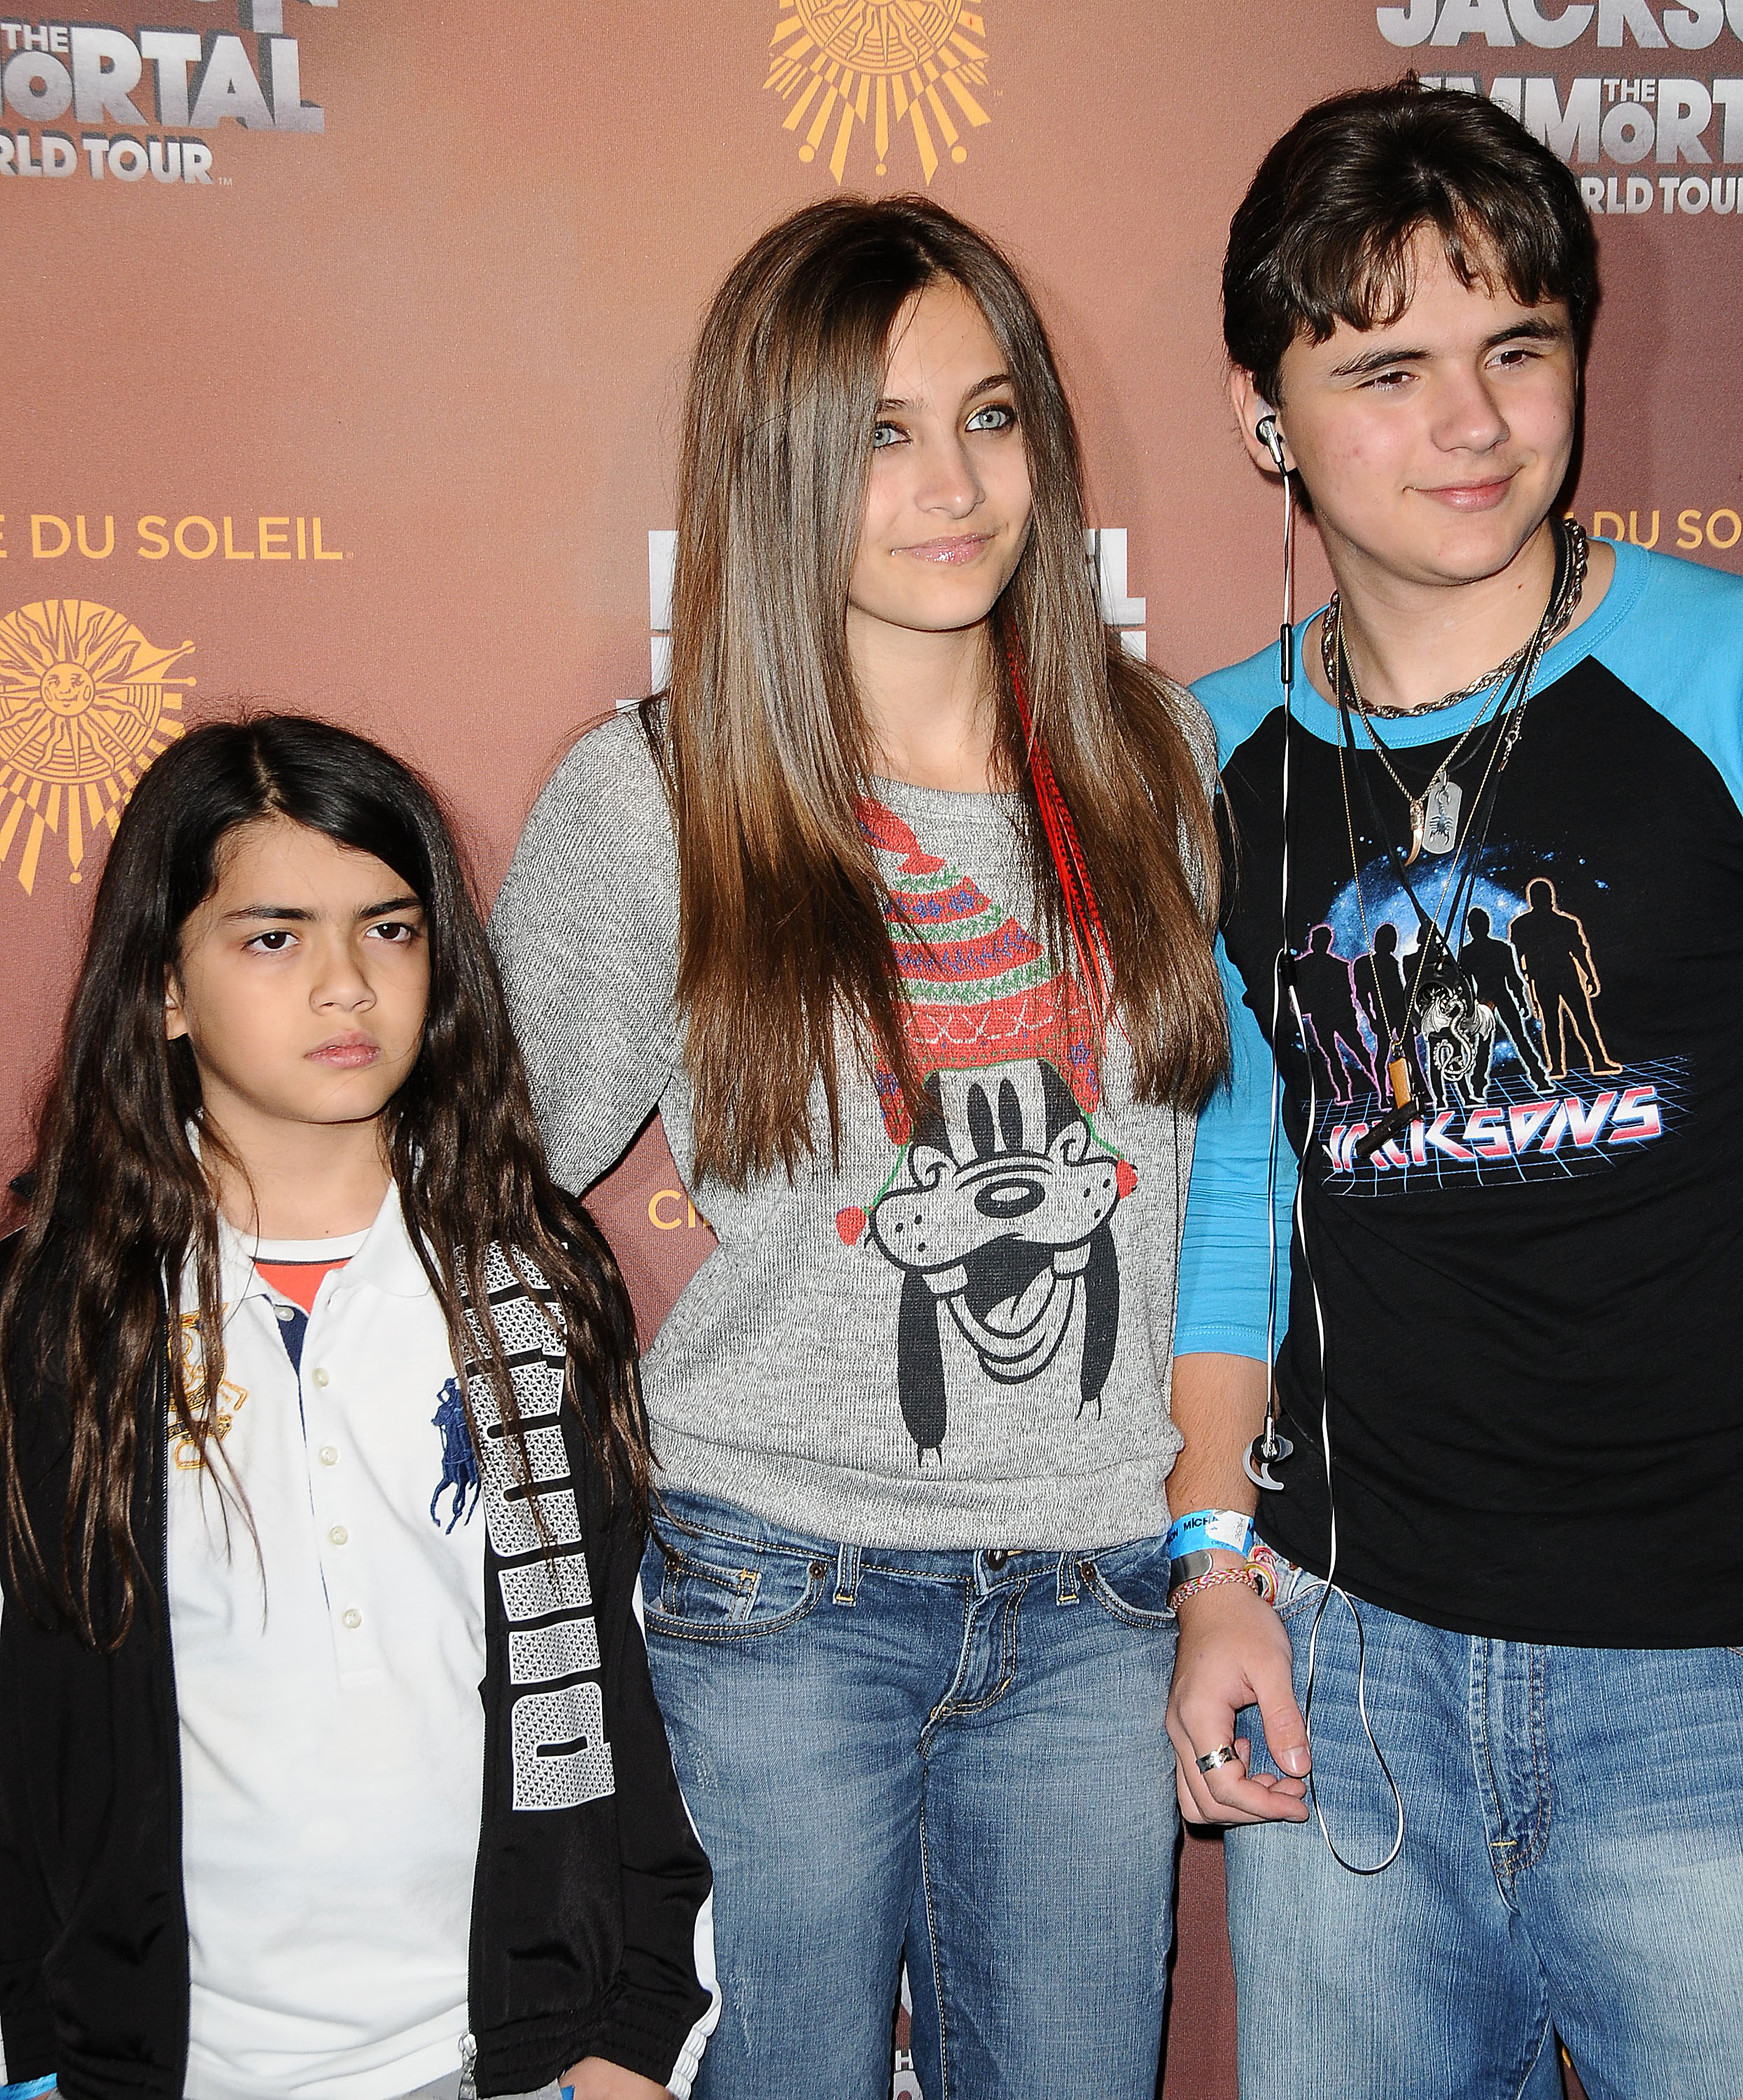 Prince Michael Jackson II, Paris, and Prince Michael Jackson attend the Los Angeles opening of "Michael Jackson THE IMMORTAL World Tour" on January 27, 2012 in Los Angeles, California | Source: Getty Images